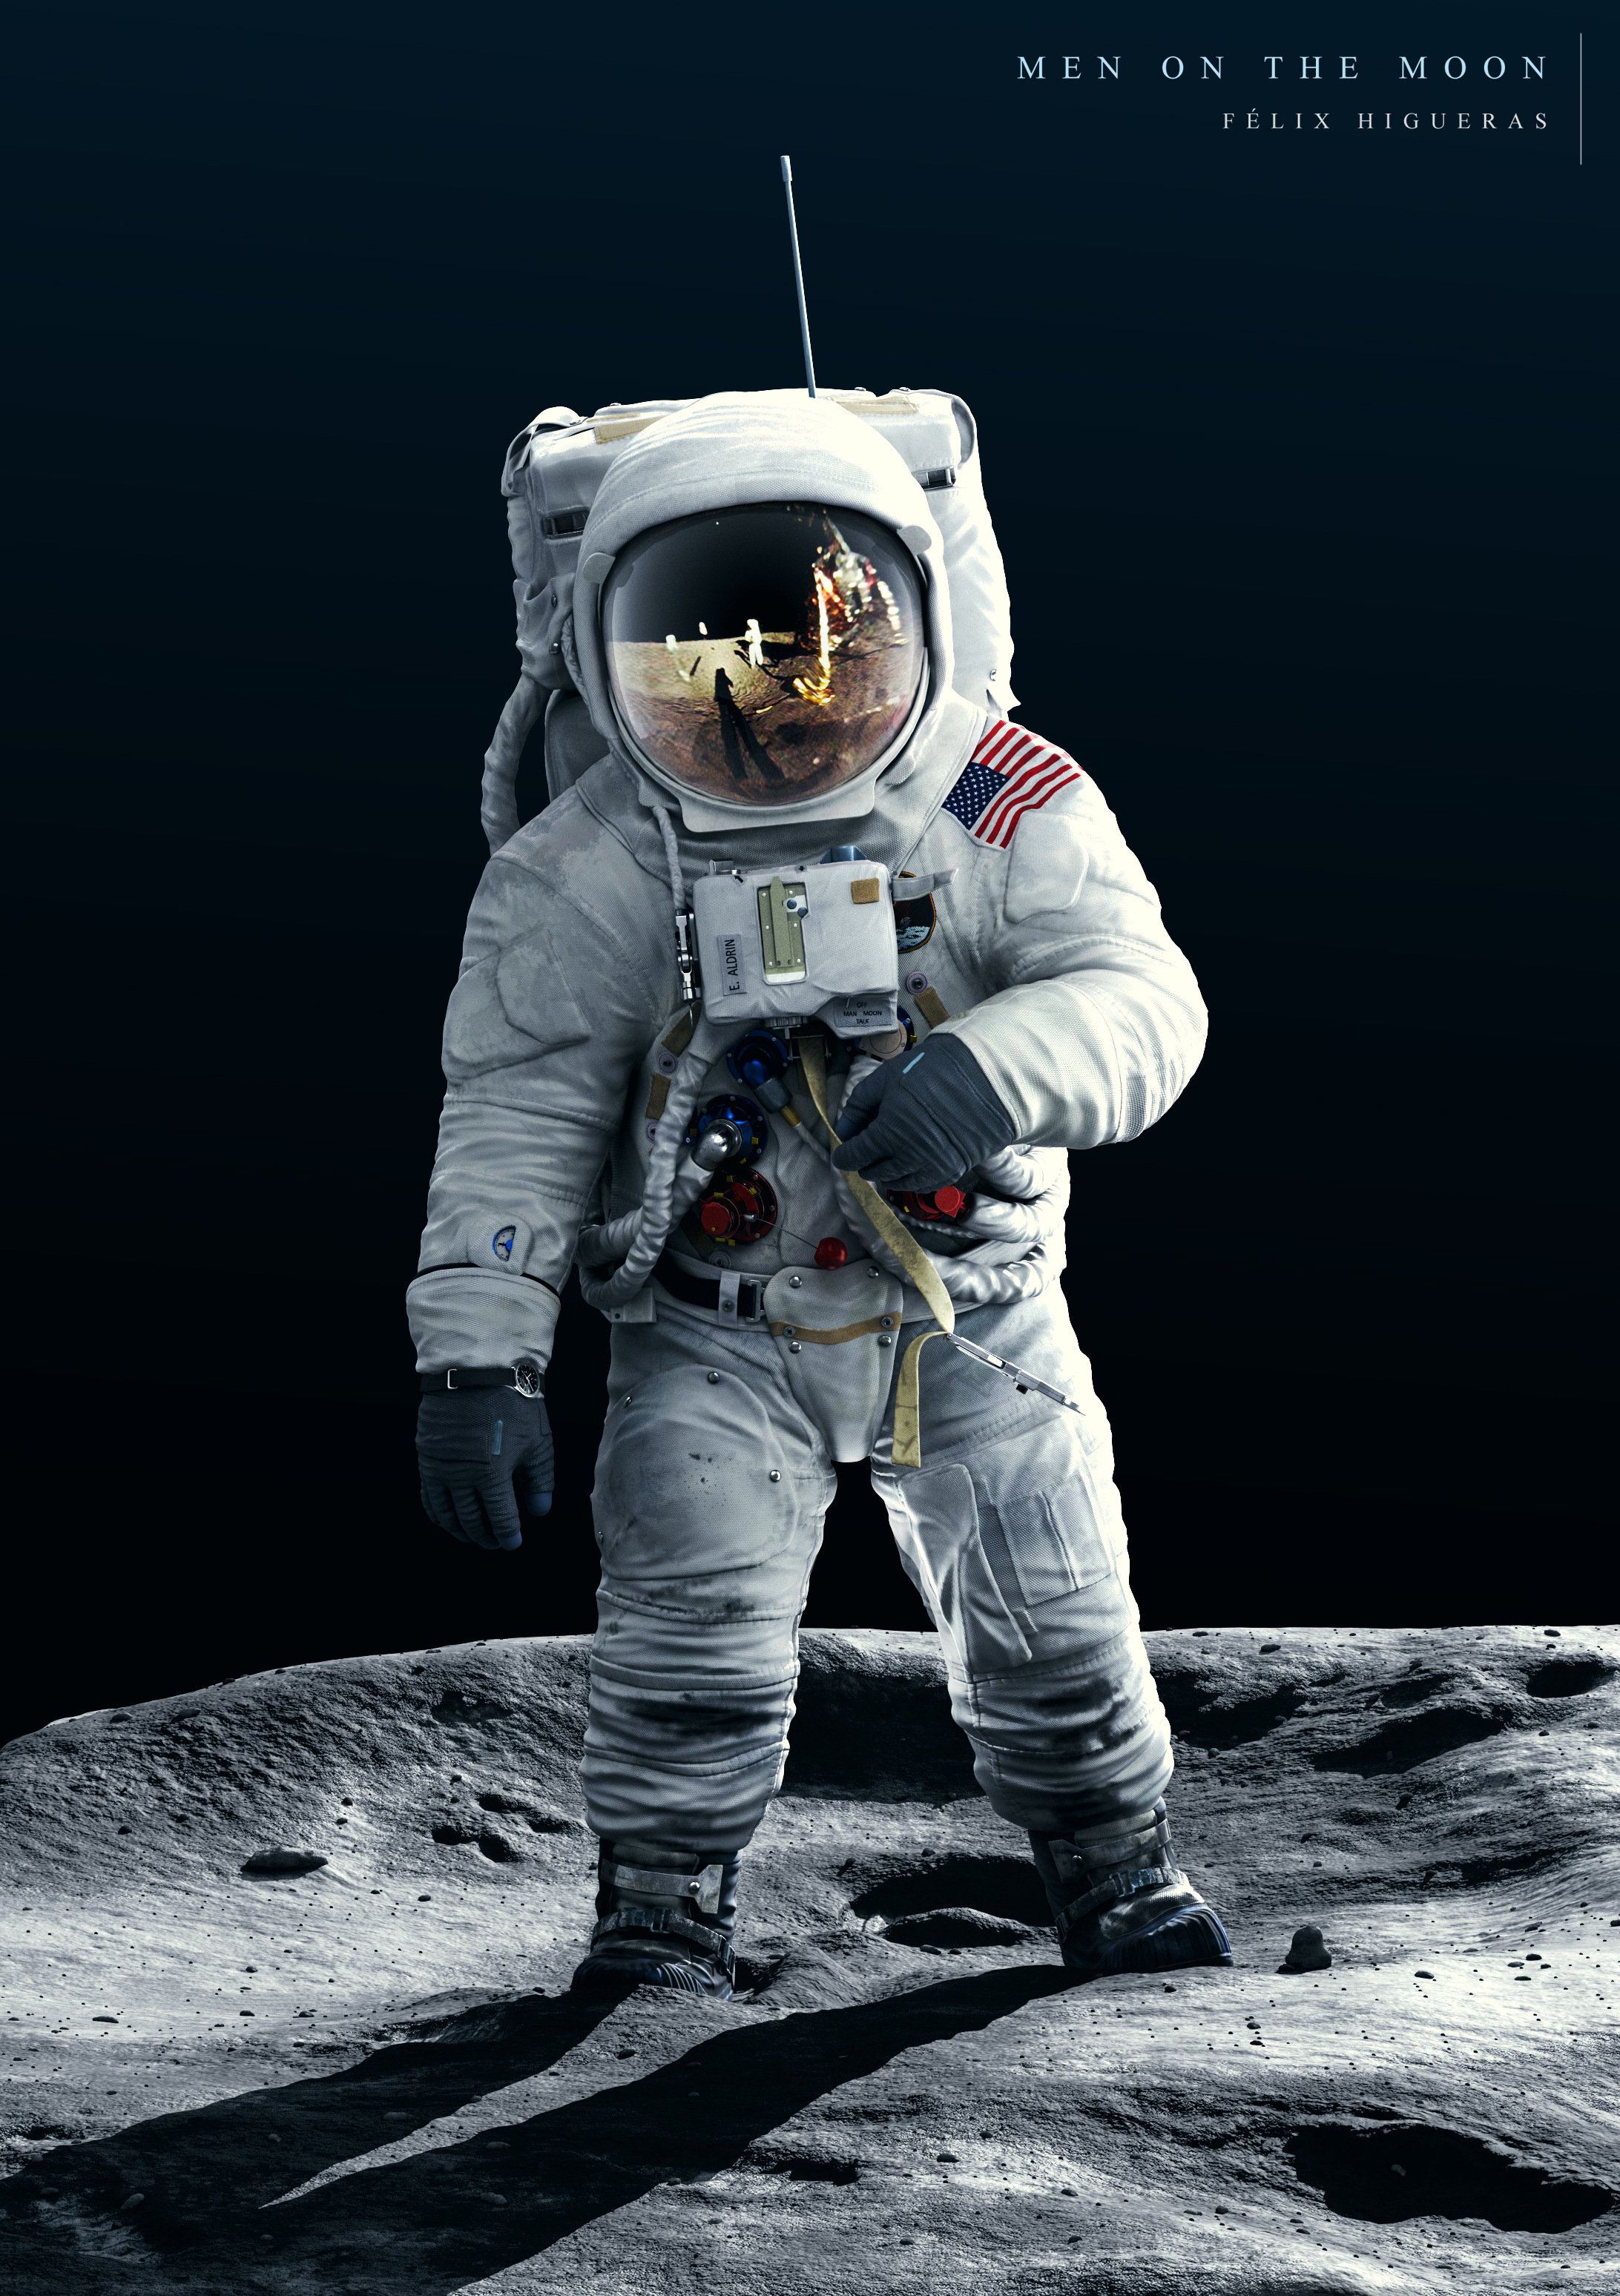 CGMEETUP - Men On The Moon by Felix Higueras